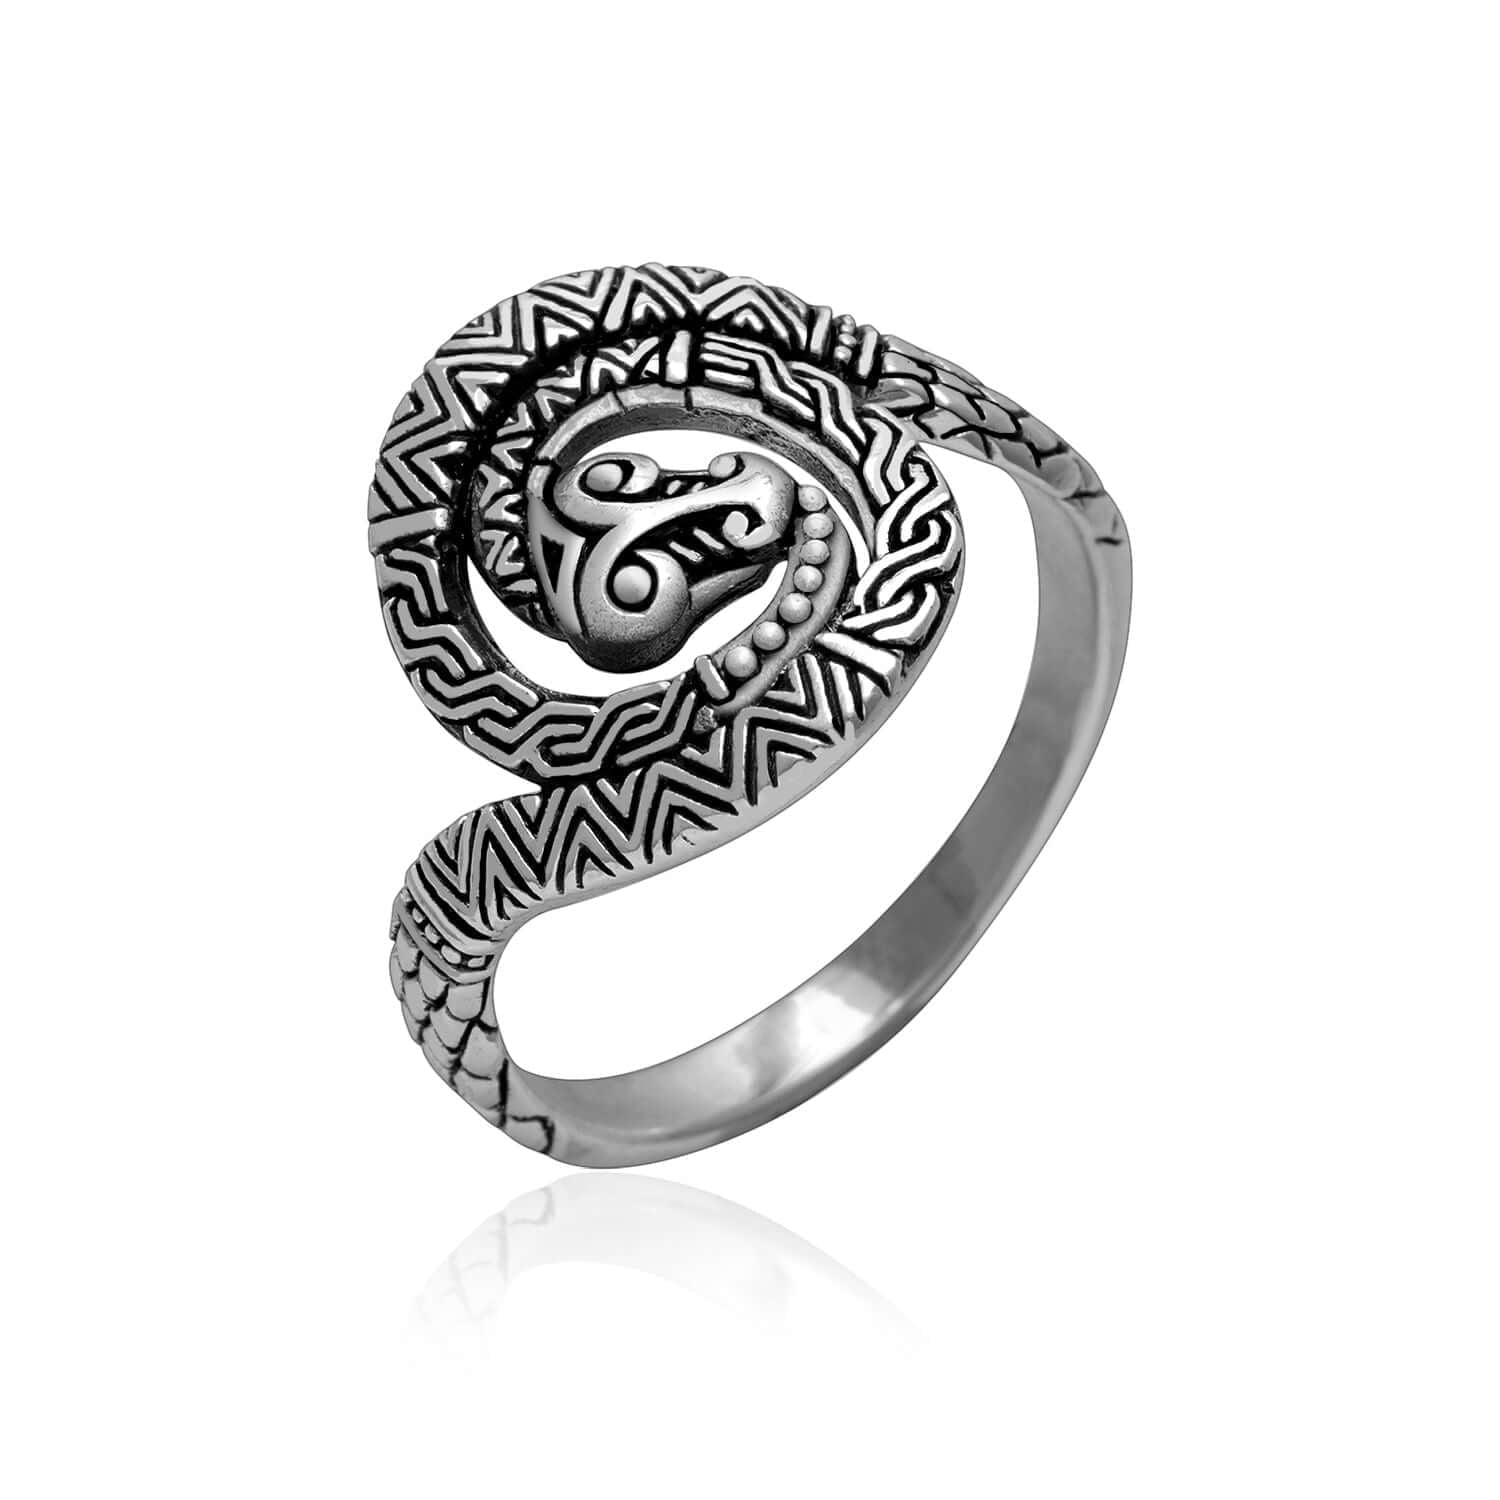 925 Sterling Silver Greek Ouroboros Snake Ring - SilverMania925